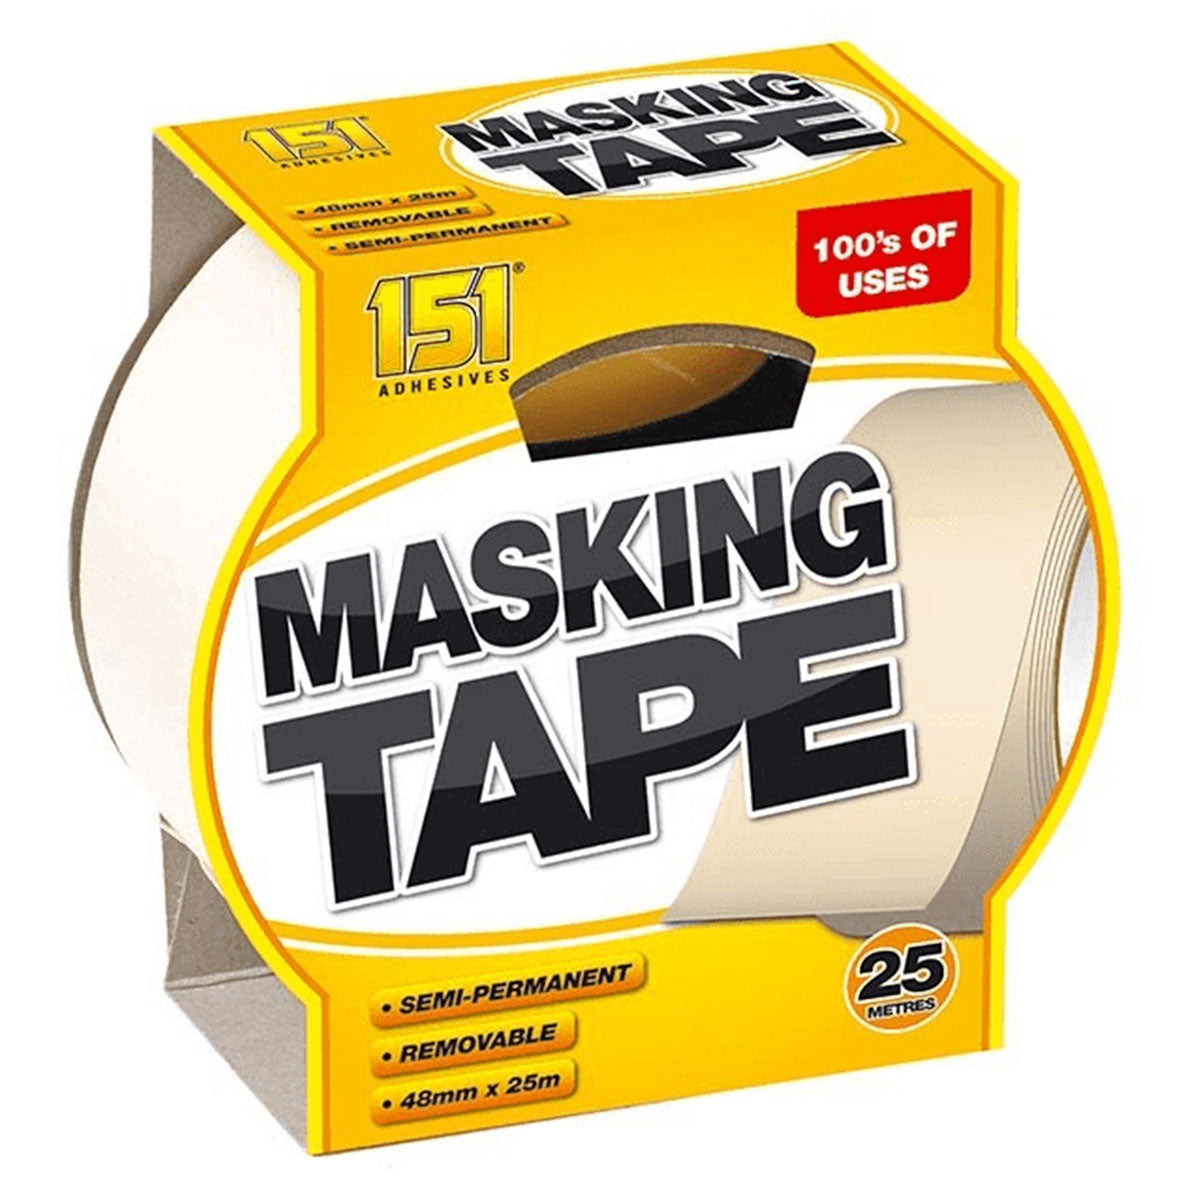 151 - Masking Tape - 48mm x 25m - Continental Food Store